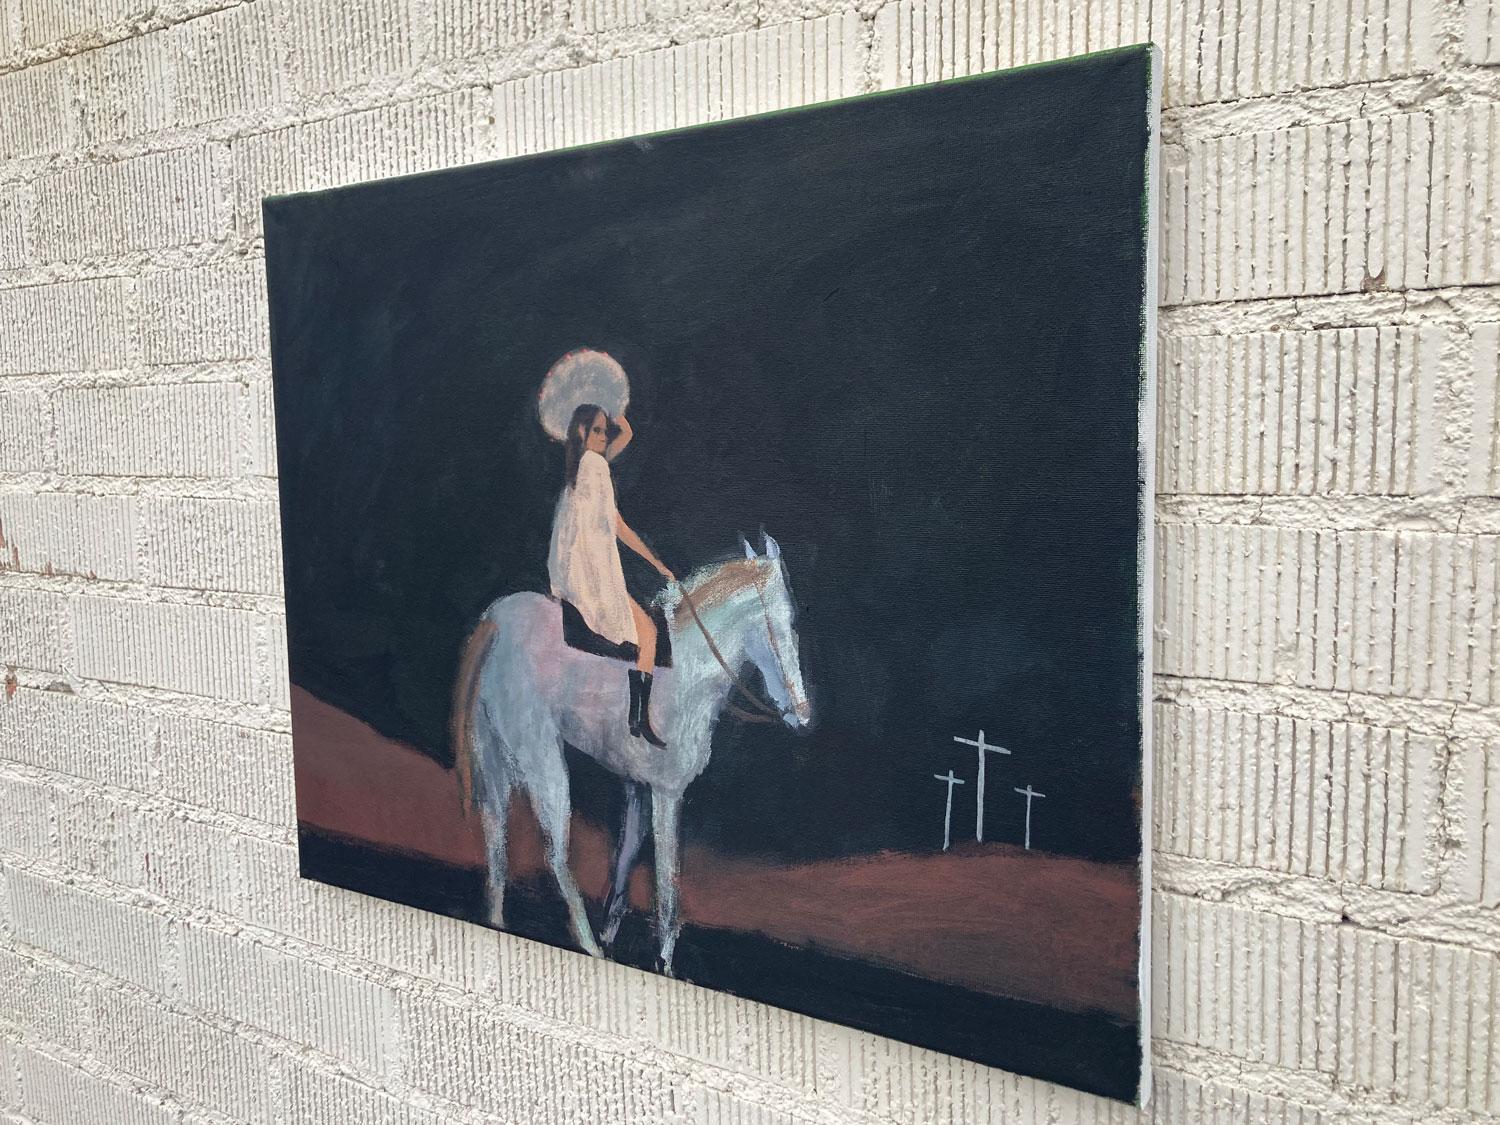 <p>Artist Comments<br>A woman rides a horse toward crosses in the night in artist Nick Bontorno's piece. In his distinct primitivist style, he renders the work with minimal representation. The girl holds her hat as she peers out at the evening